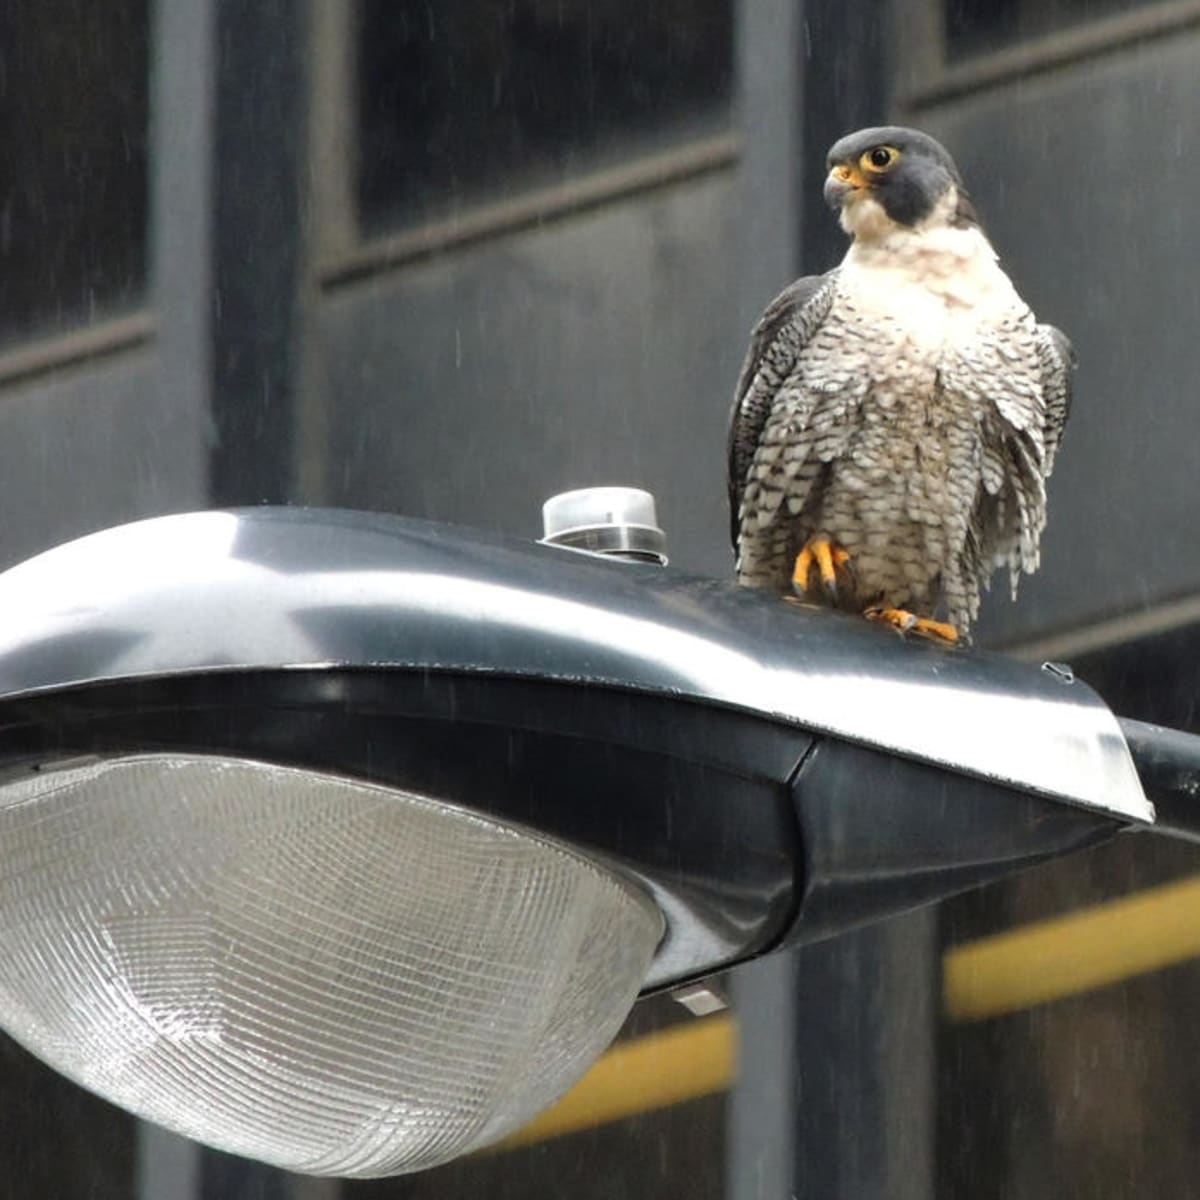 How Do You Save Peregrine Falcons Send Them To The City Pacific Standard